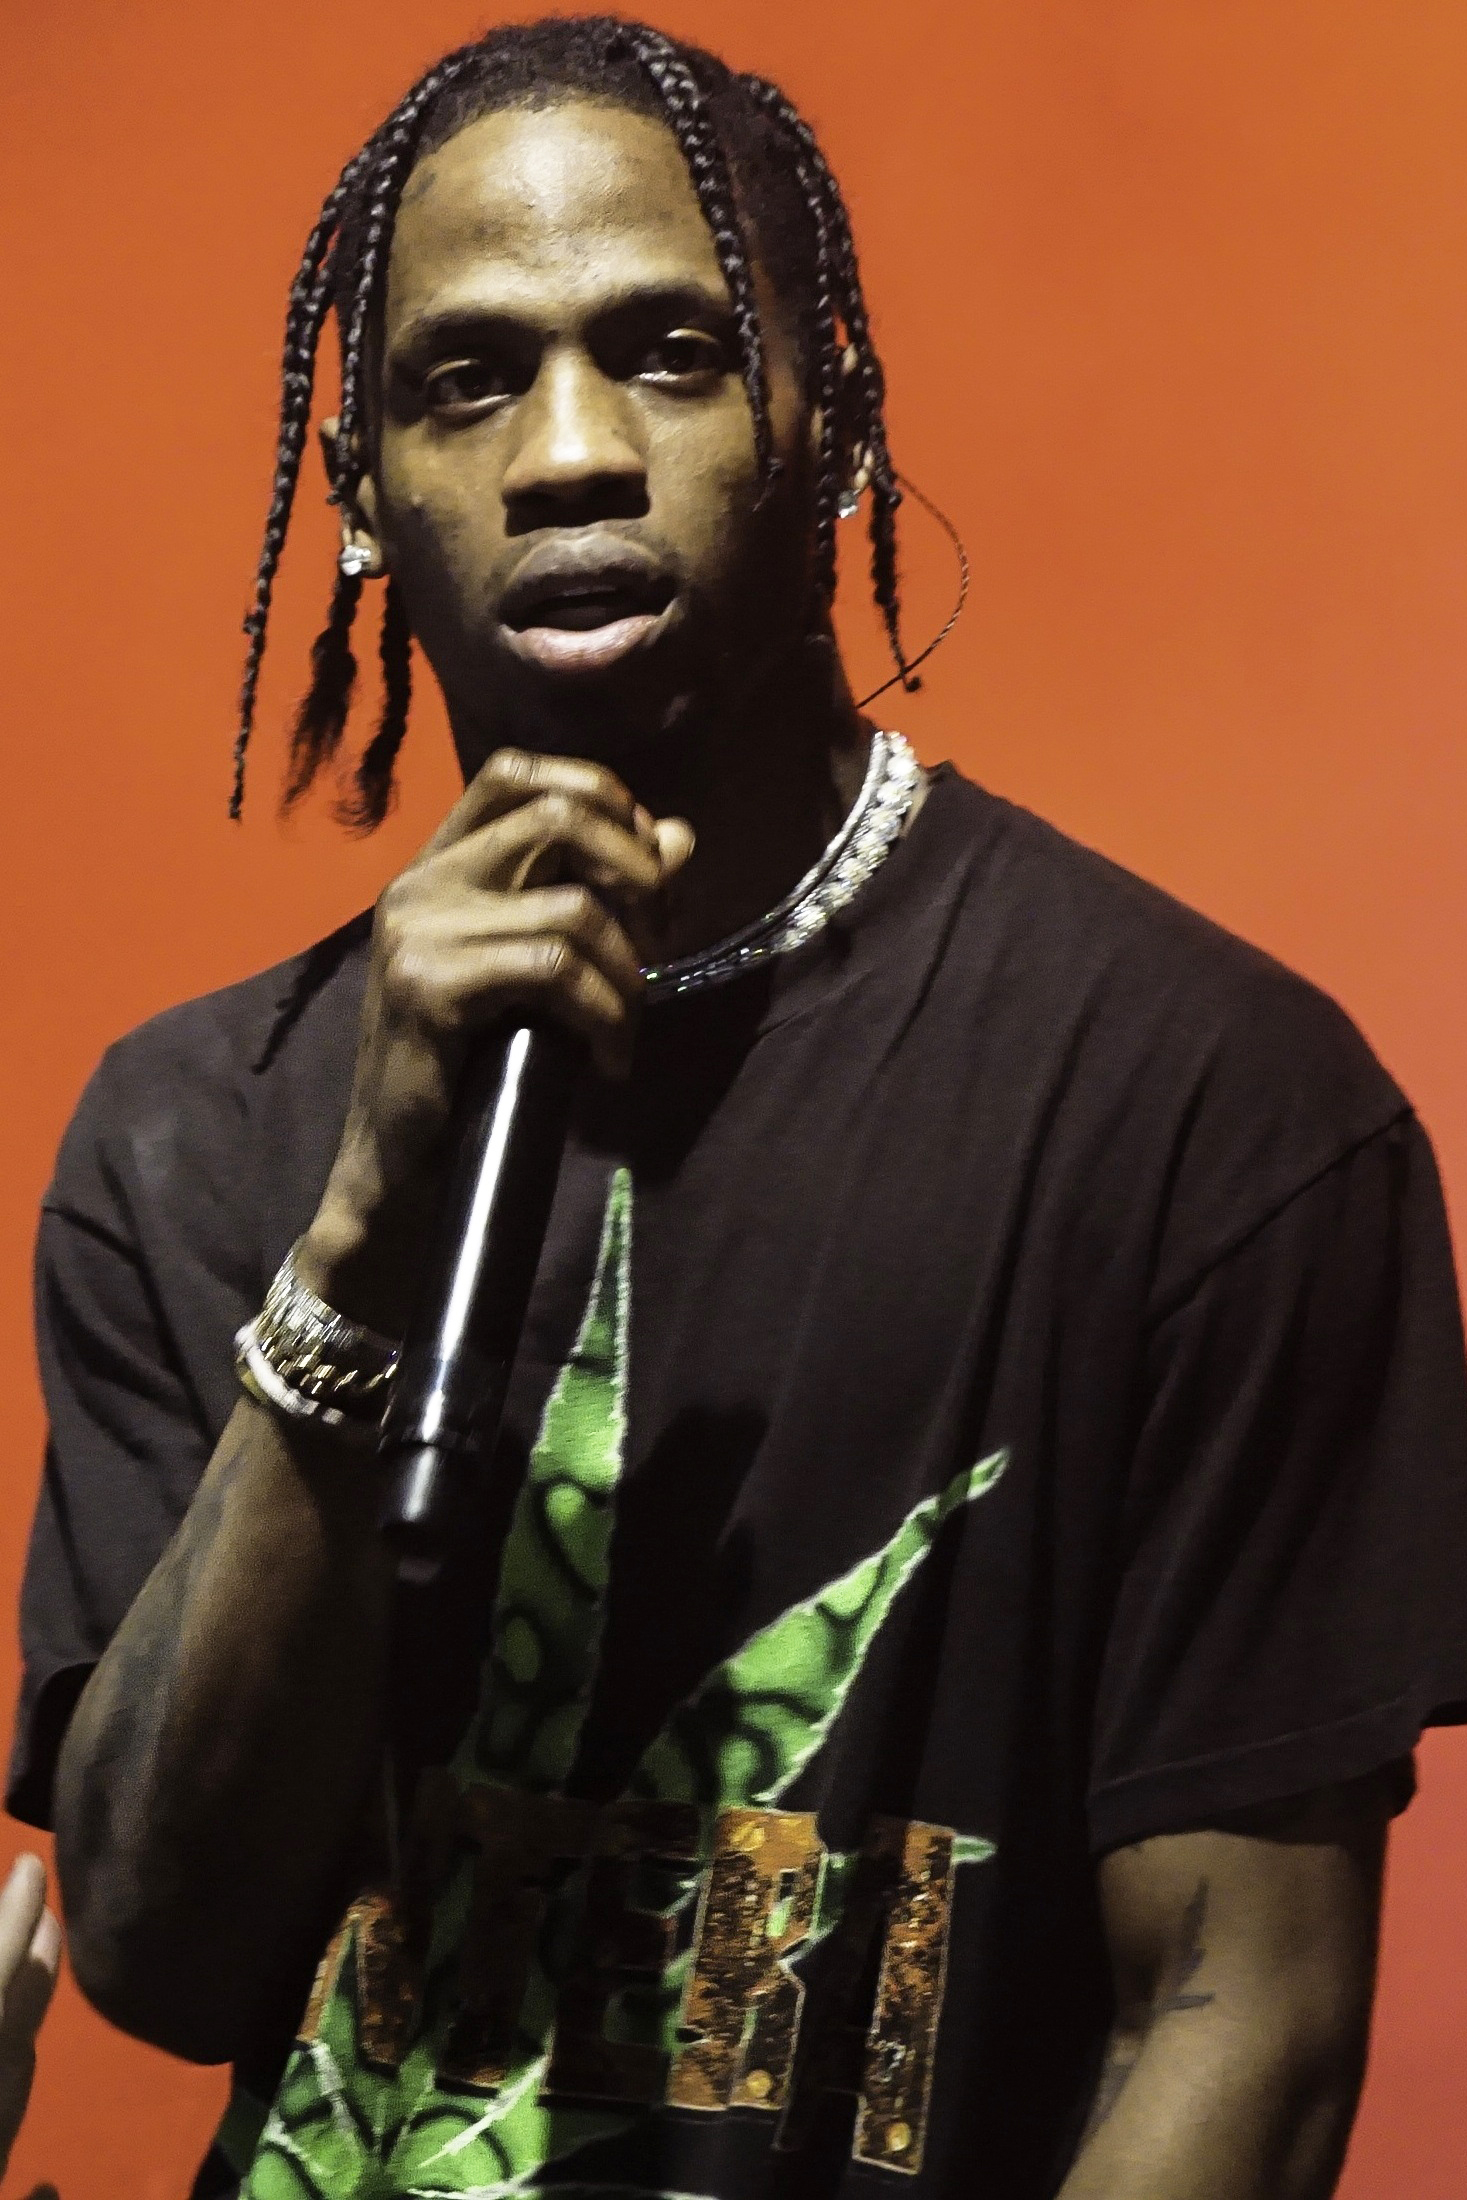 You should direct your anger at the NFL; not Travis Scott - The Cord